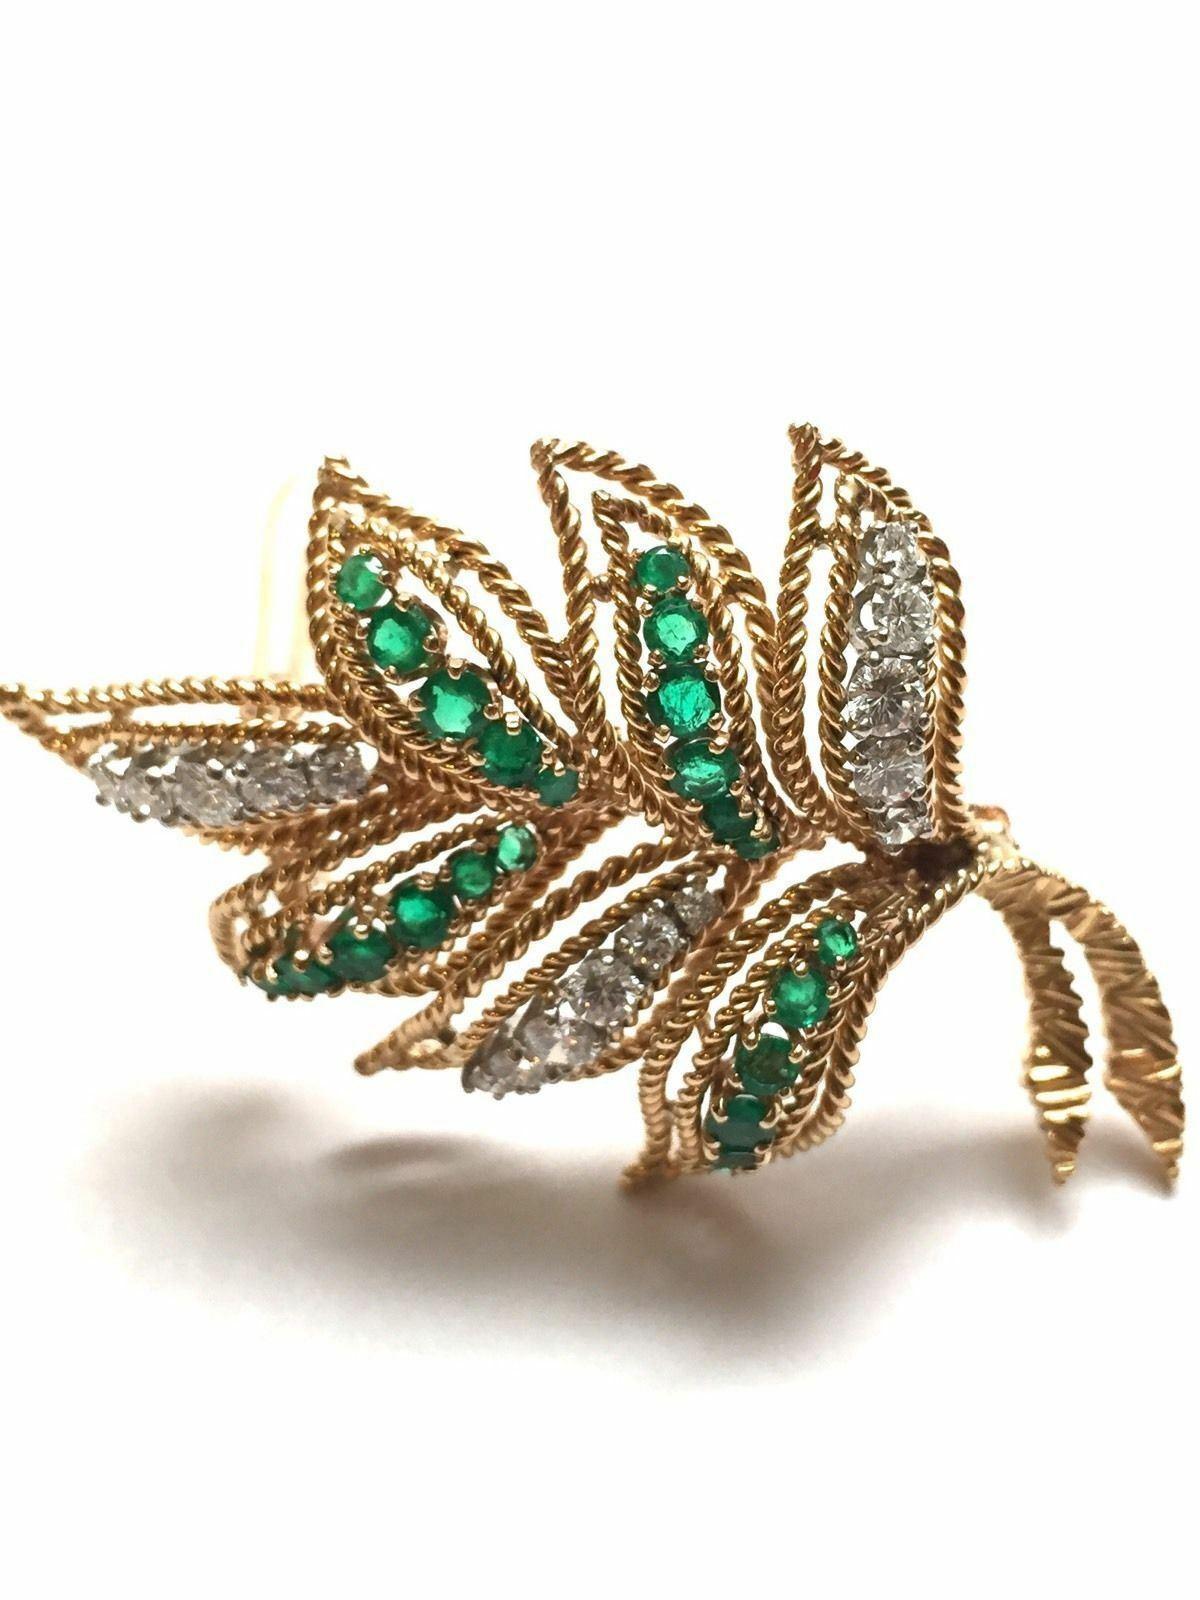 Van Cleef & Arpels 18K Yellow Gold Diamond Emerald Leaf Brooch Pin

This gorgeous vintage brooch dates back to the 1960's.

It is created with braided leaves of gold set with genuine green emeralds and diamonds.

16 round brilliant diamonds graded